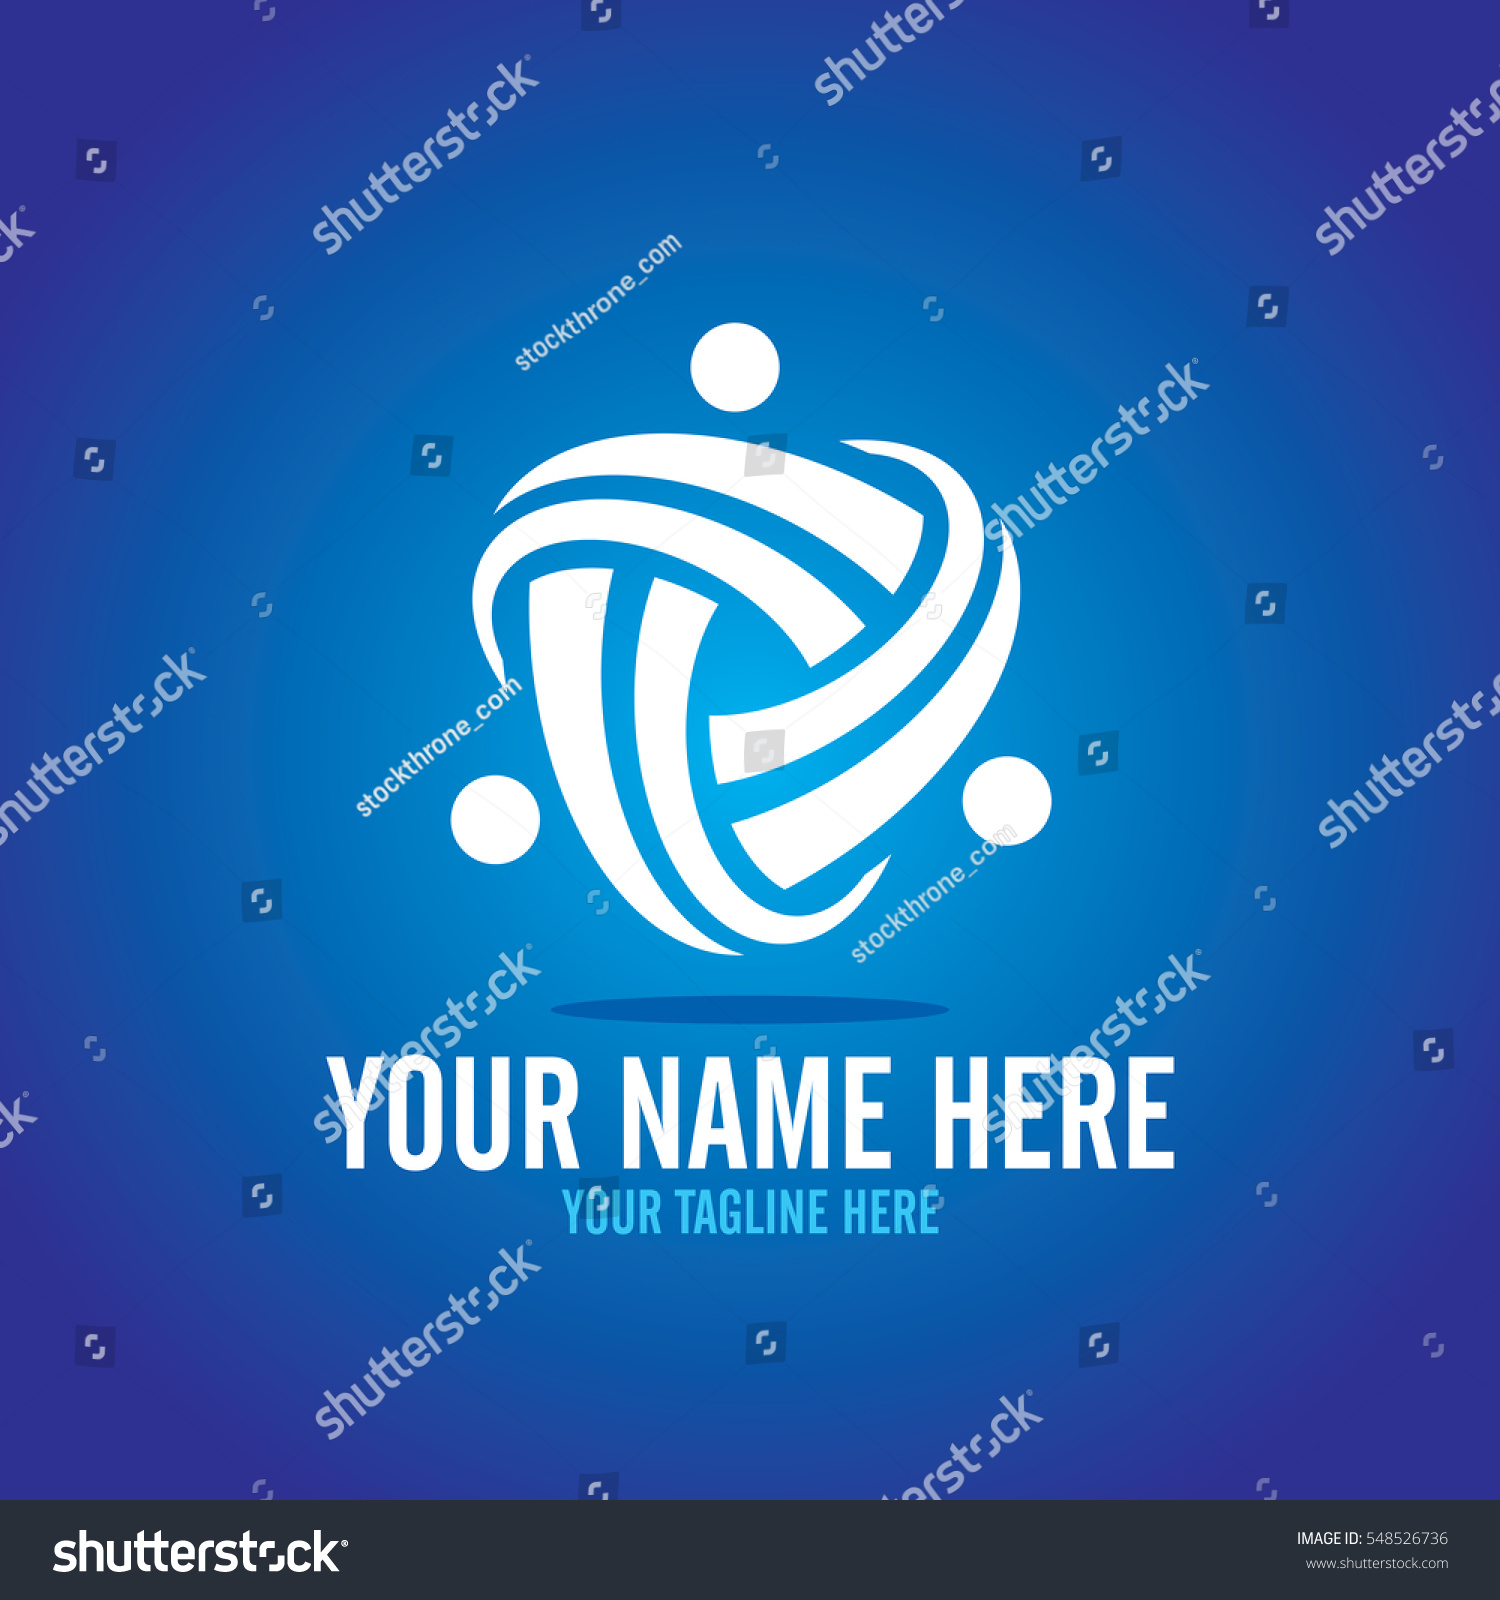 Social relationship logo and icon #548526736